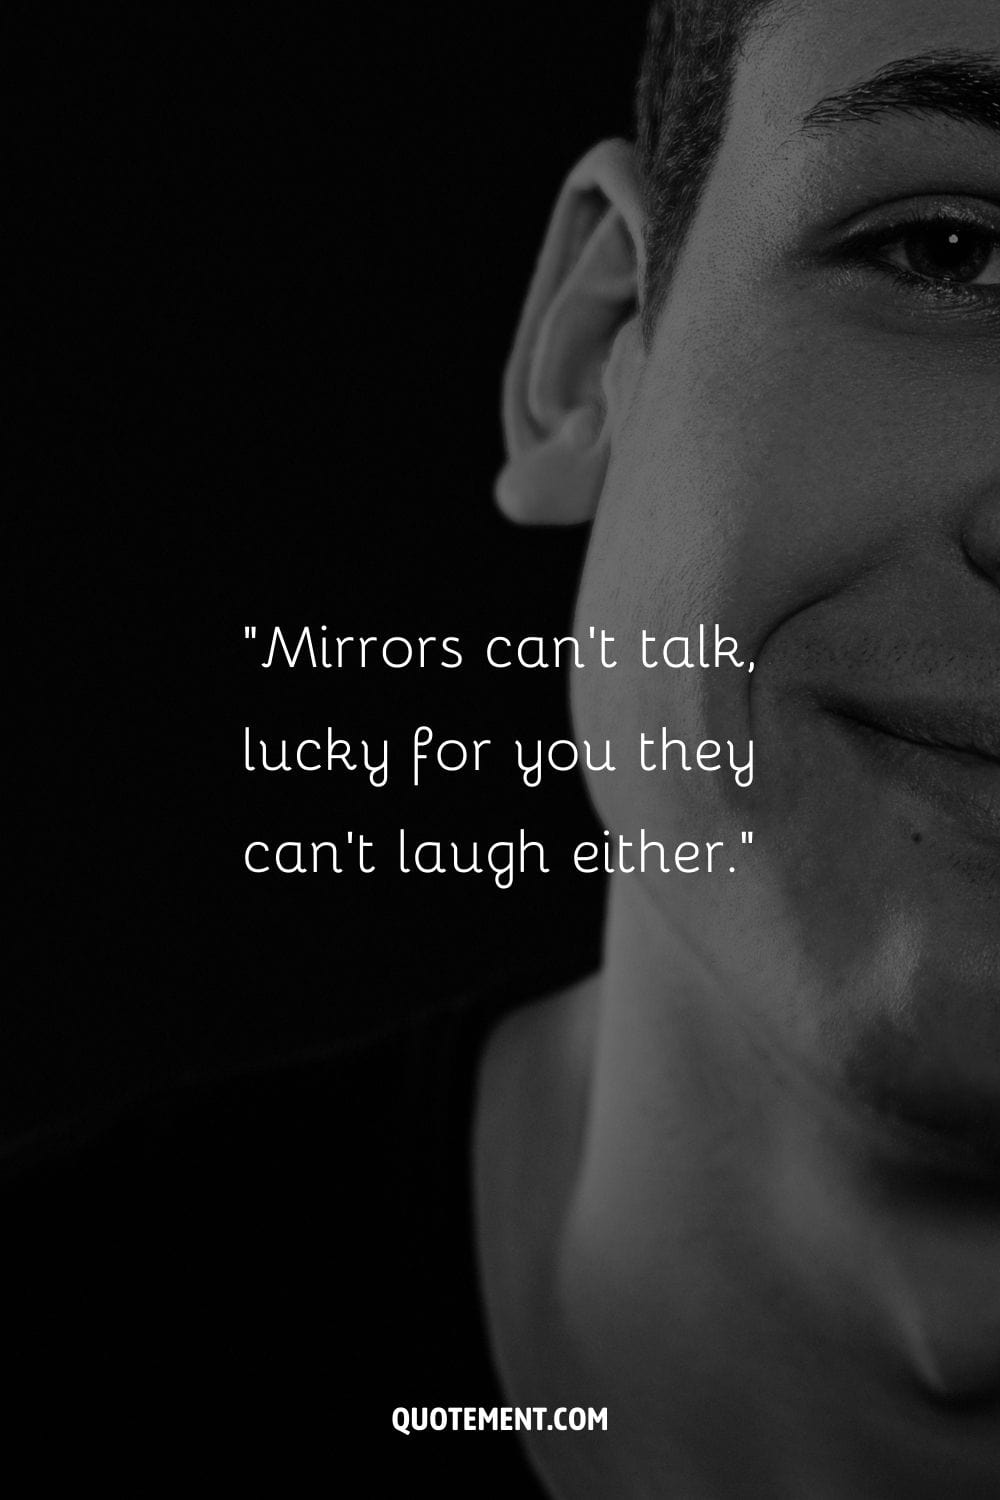 “Mirrors can’t talk, lucky for you they can’t laugh either.” ― Unknown